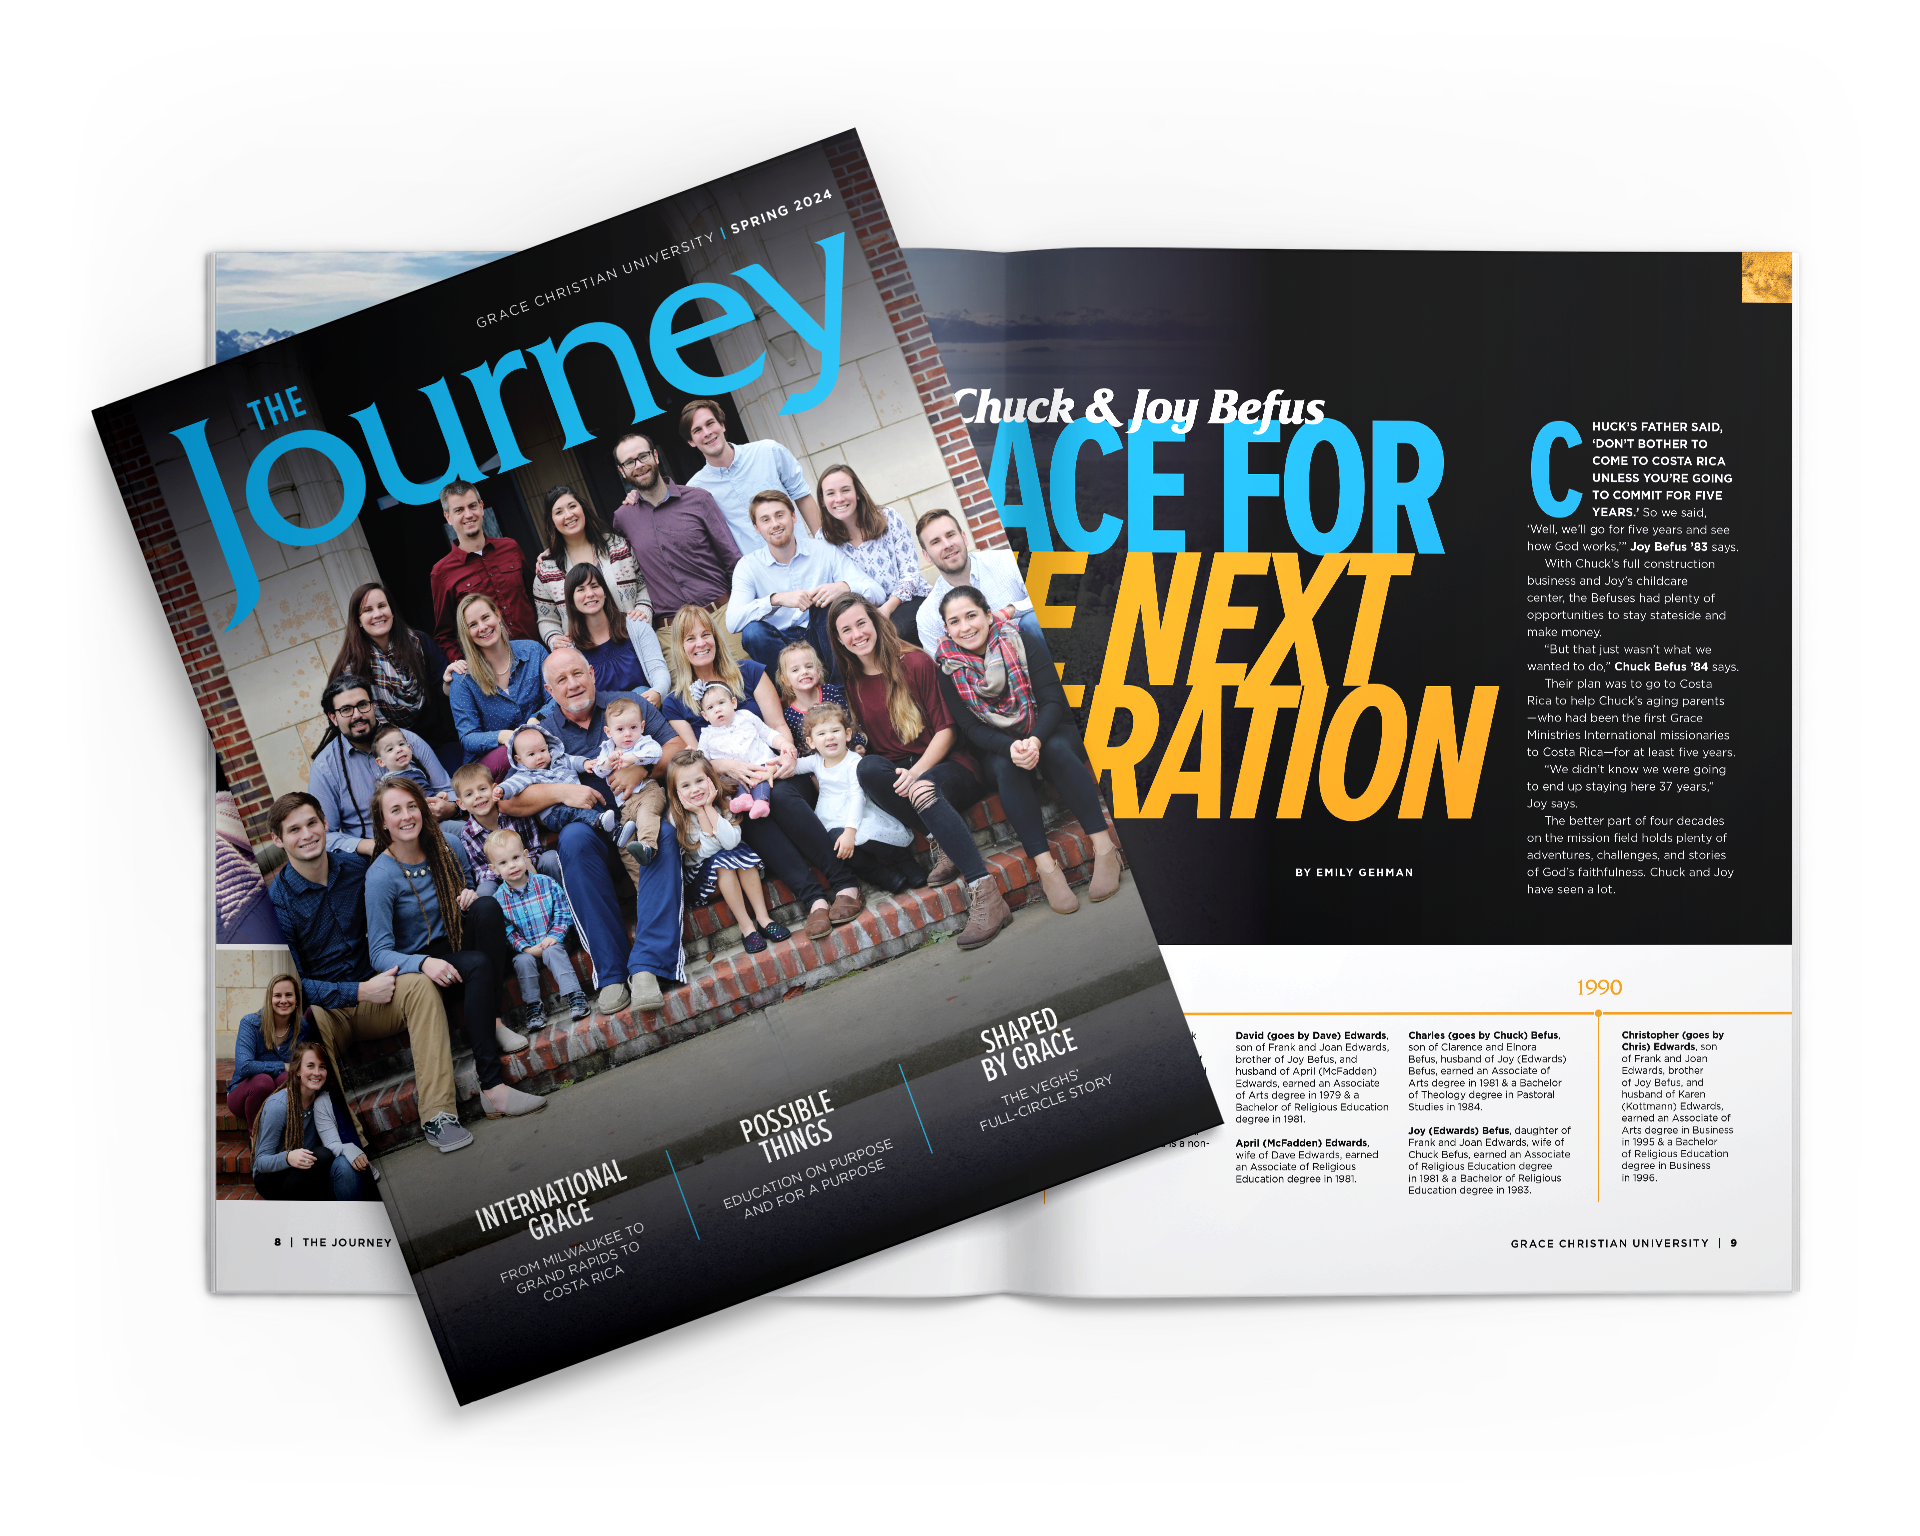 The Journey Magazine cover and cover story.